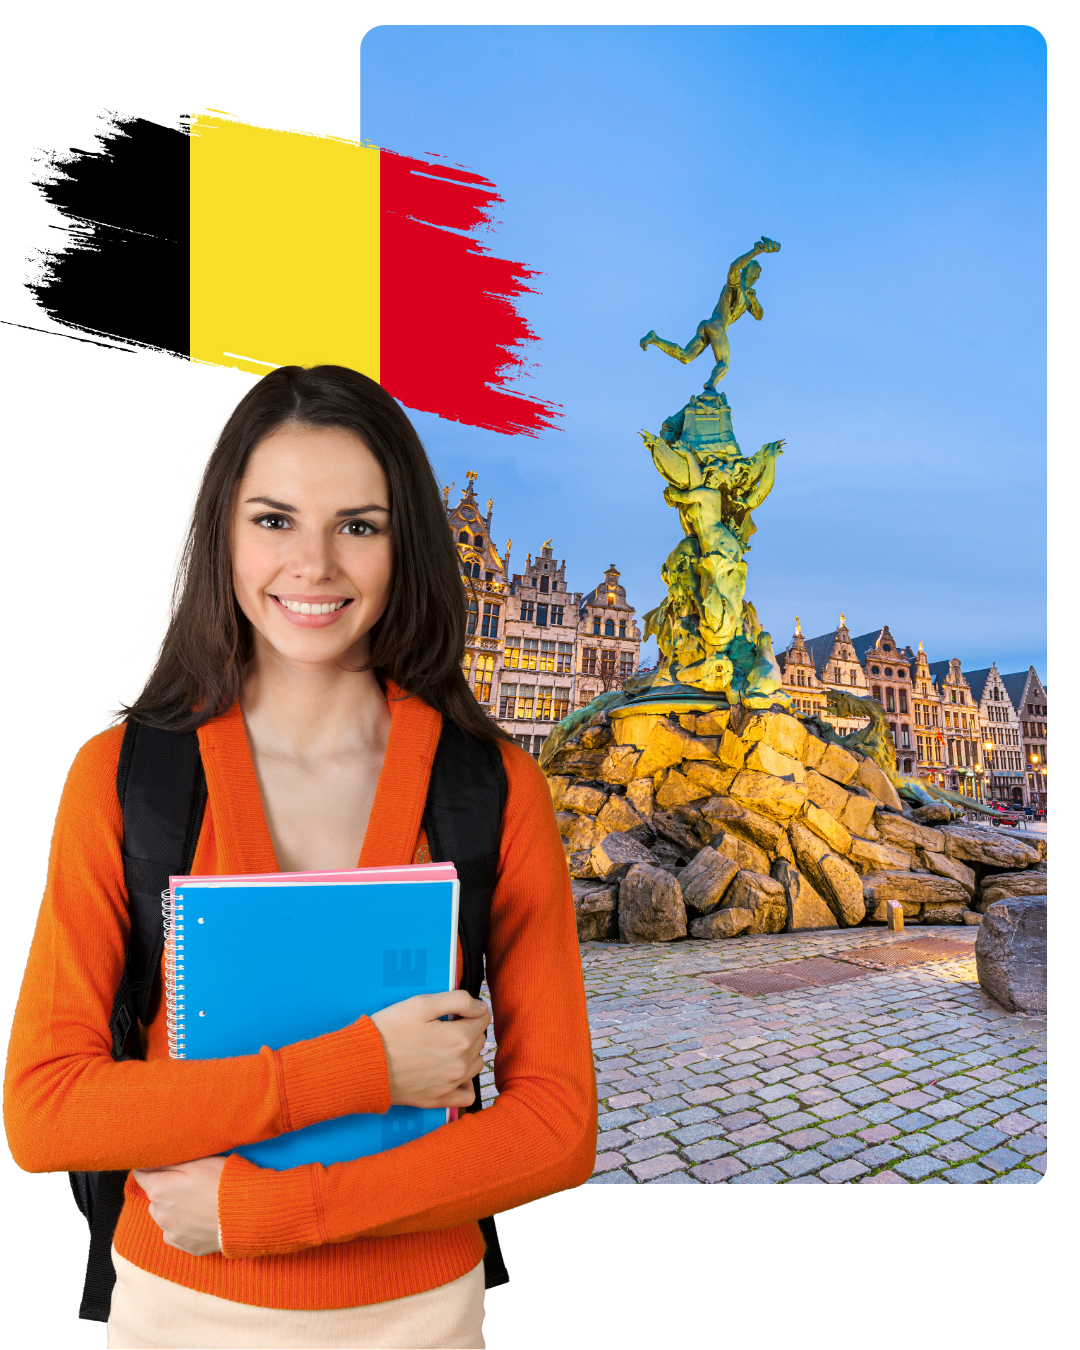 A student looking forward to study in Belgium